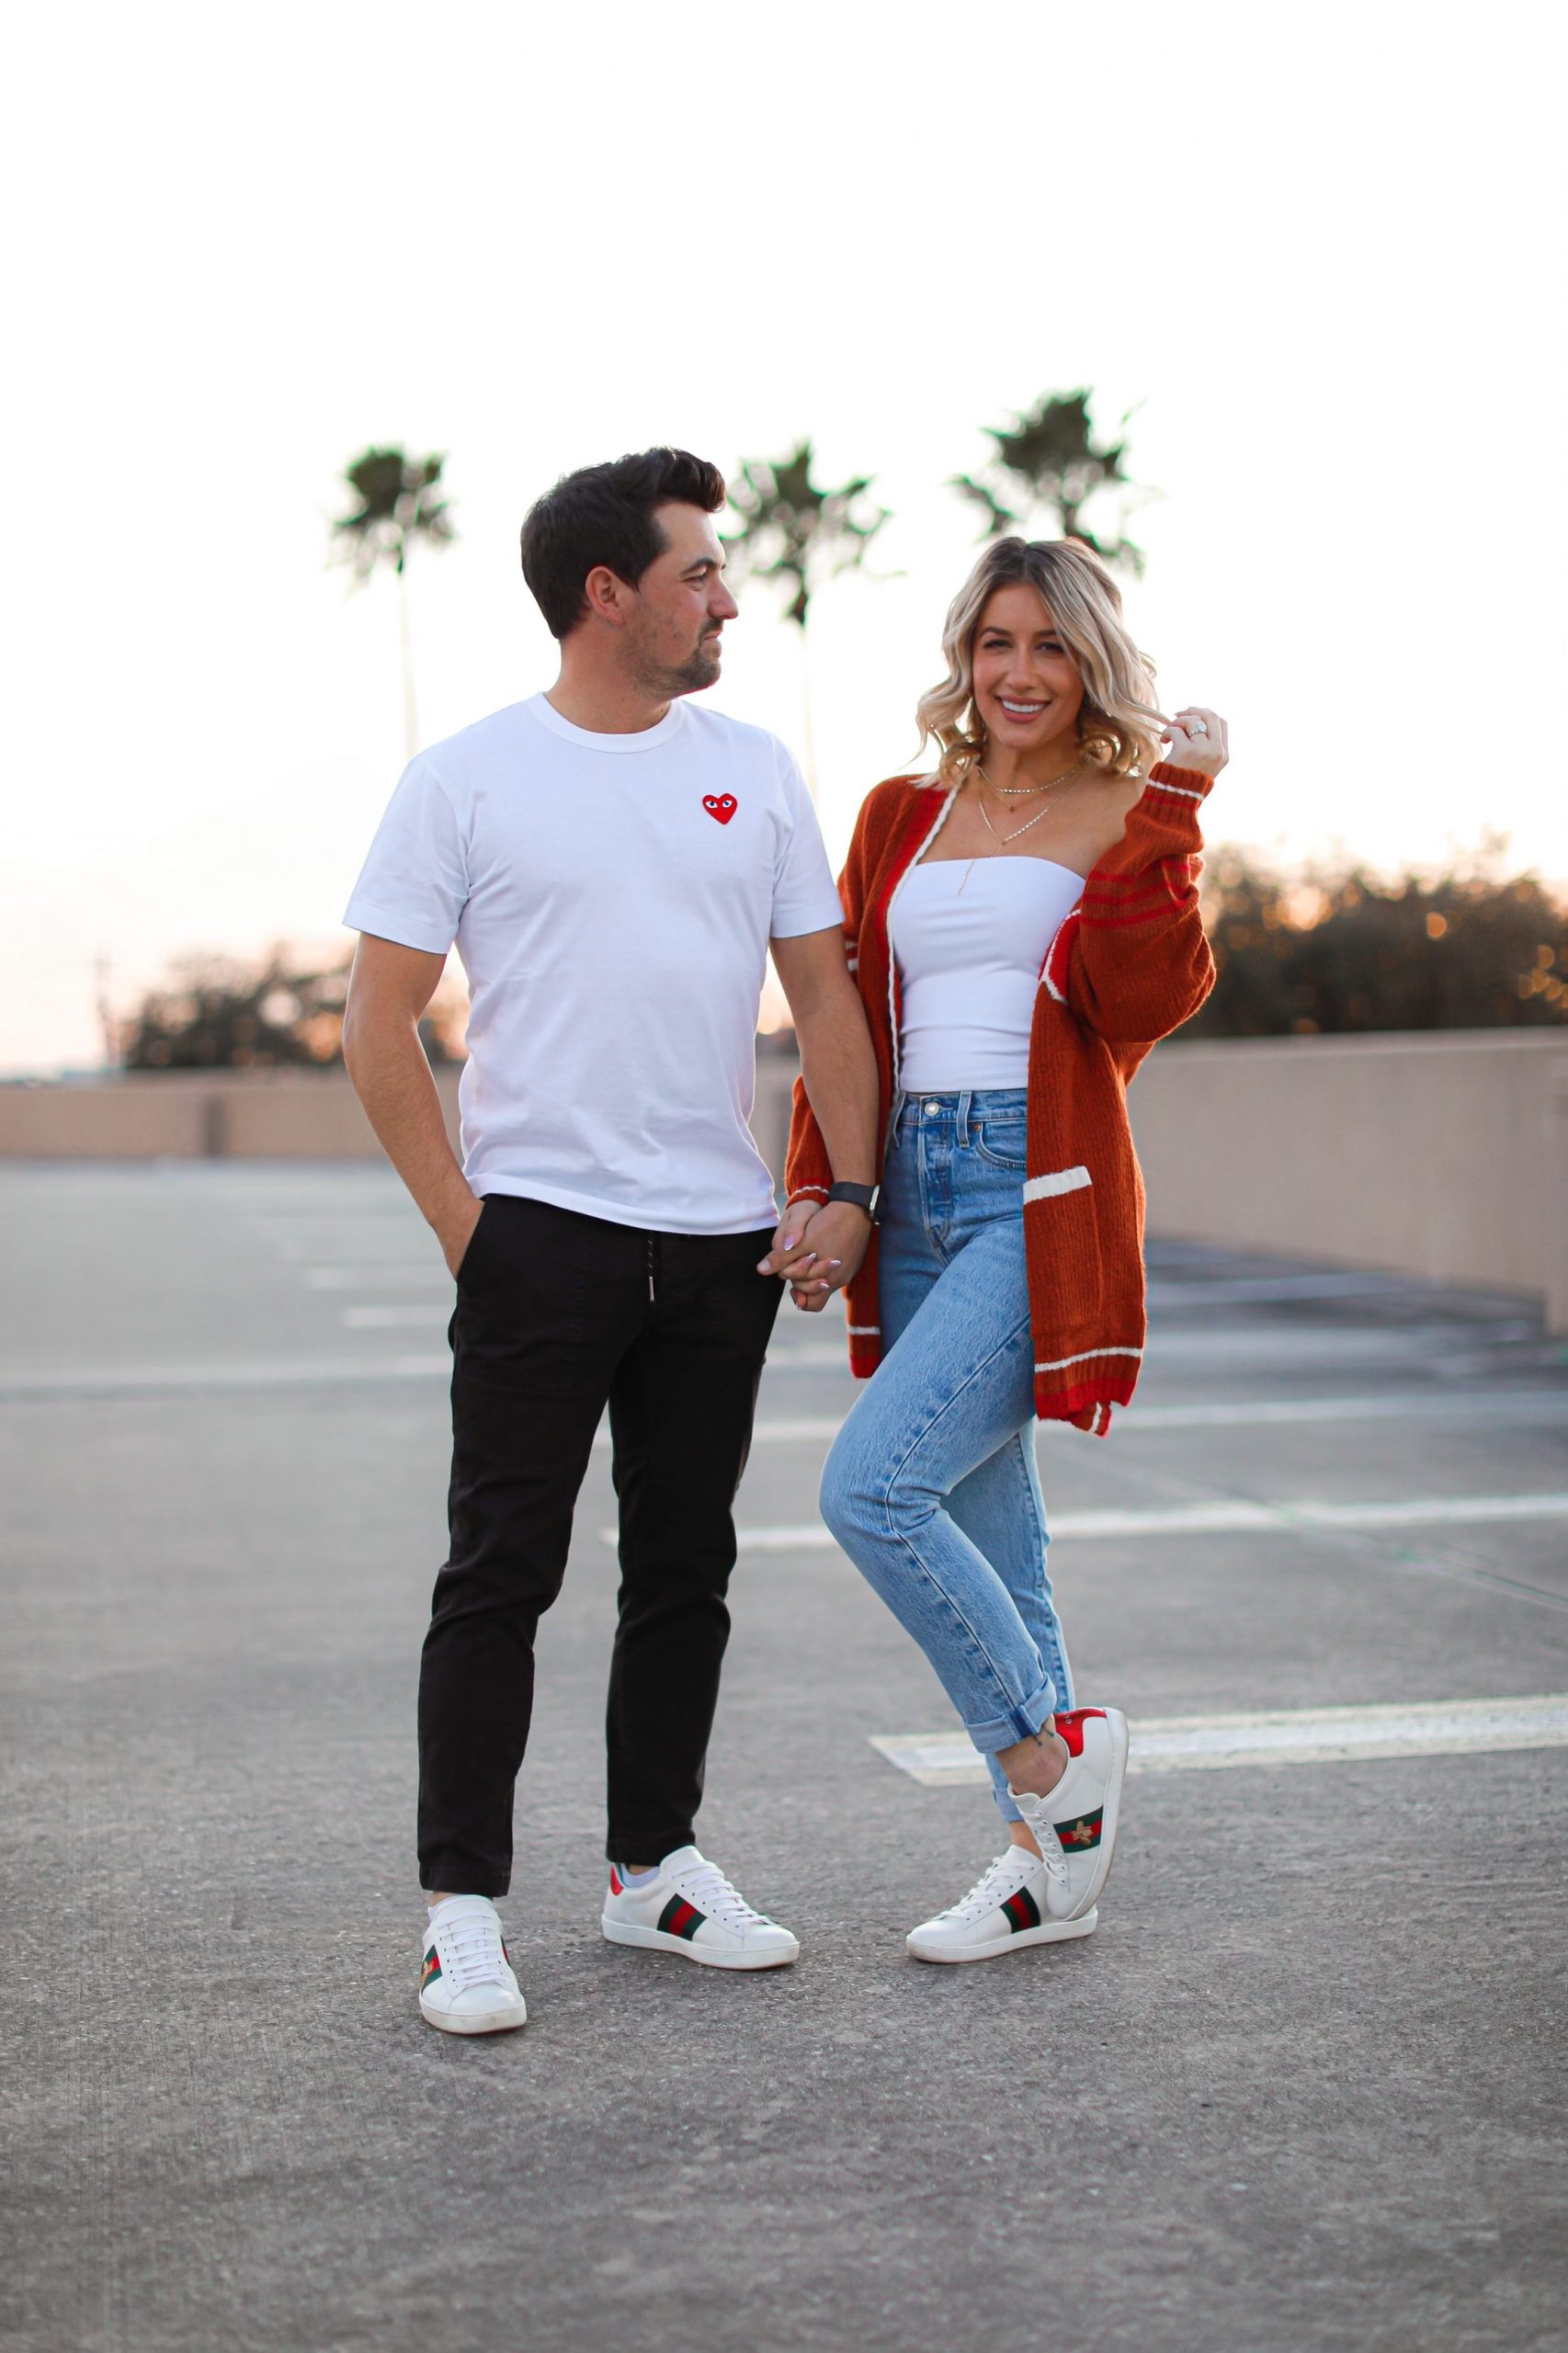 Blush & White Valentine's Day Outfit Idea - Laura Beverlin